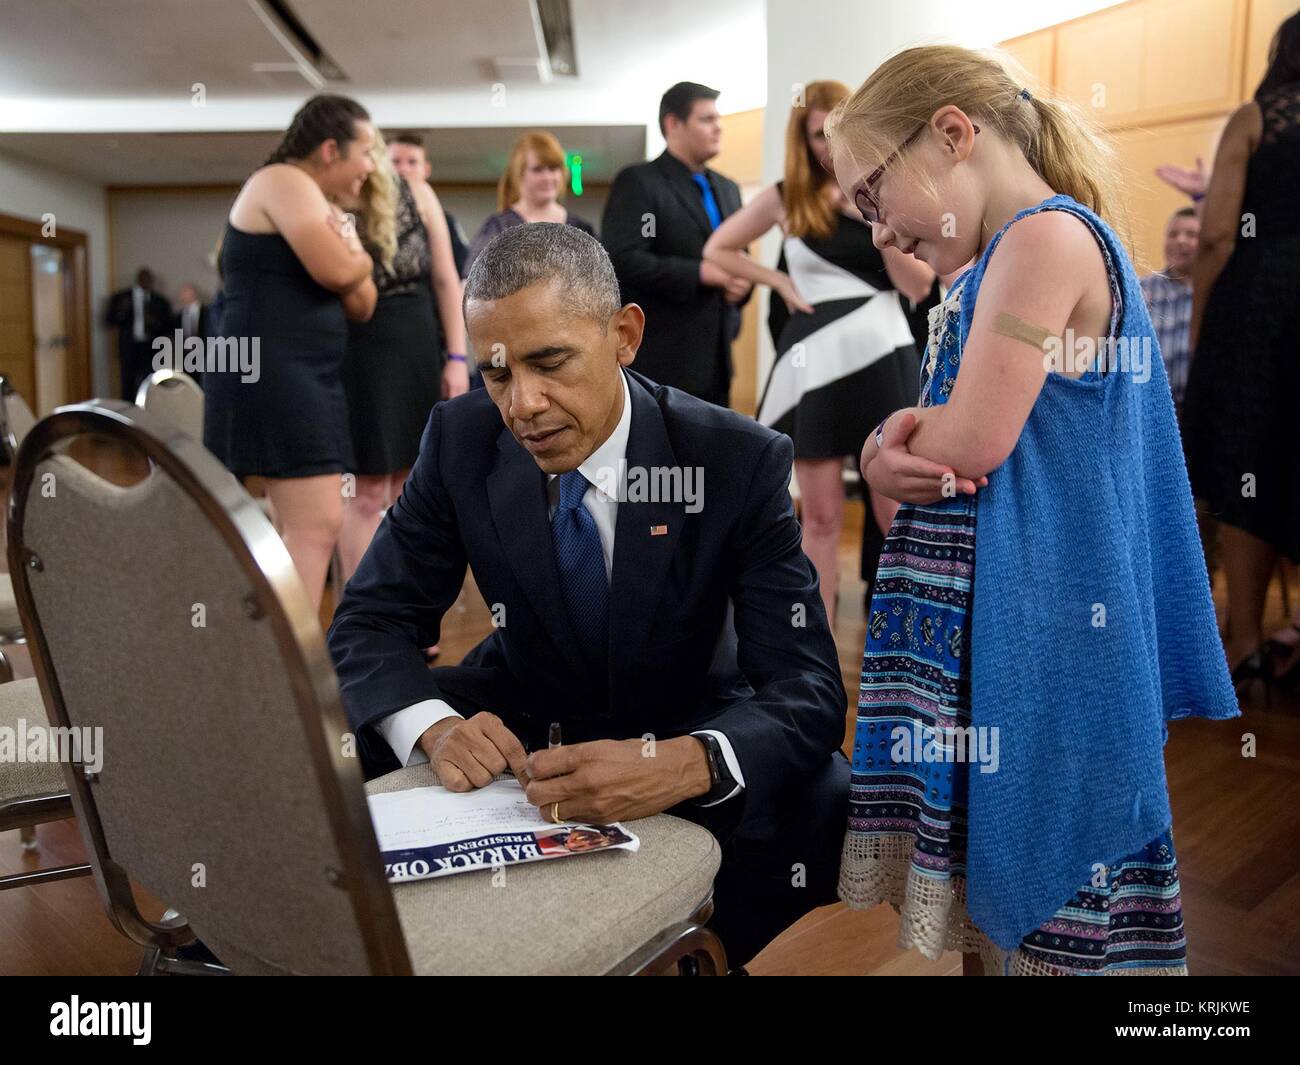 U.S. President Barack Obama signs a note for Samantha Thompson, the niece of a DART Officer killed in Dallas during a memorial service July 12, 2016 in Dallas, Texas. Stock Photo